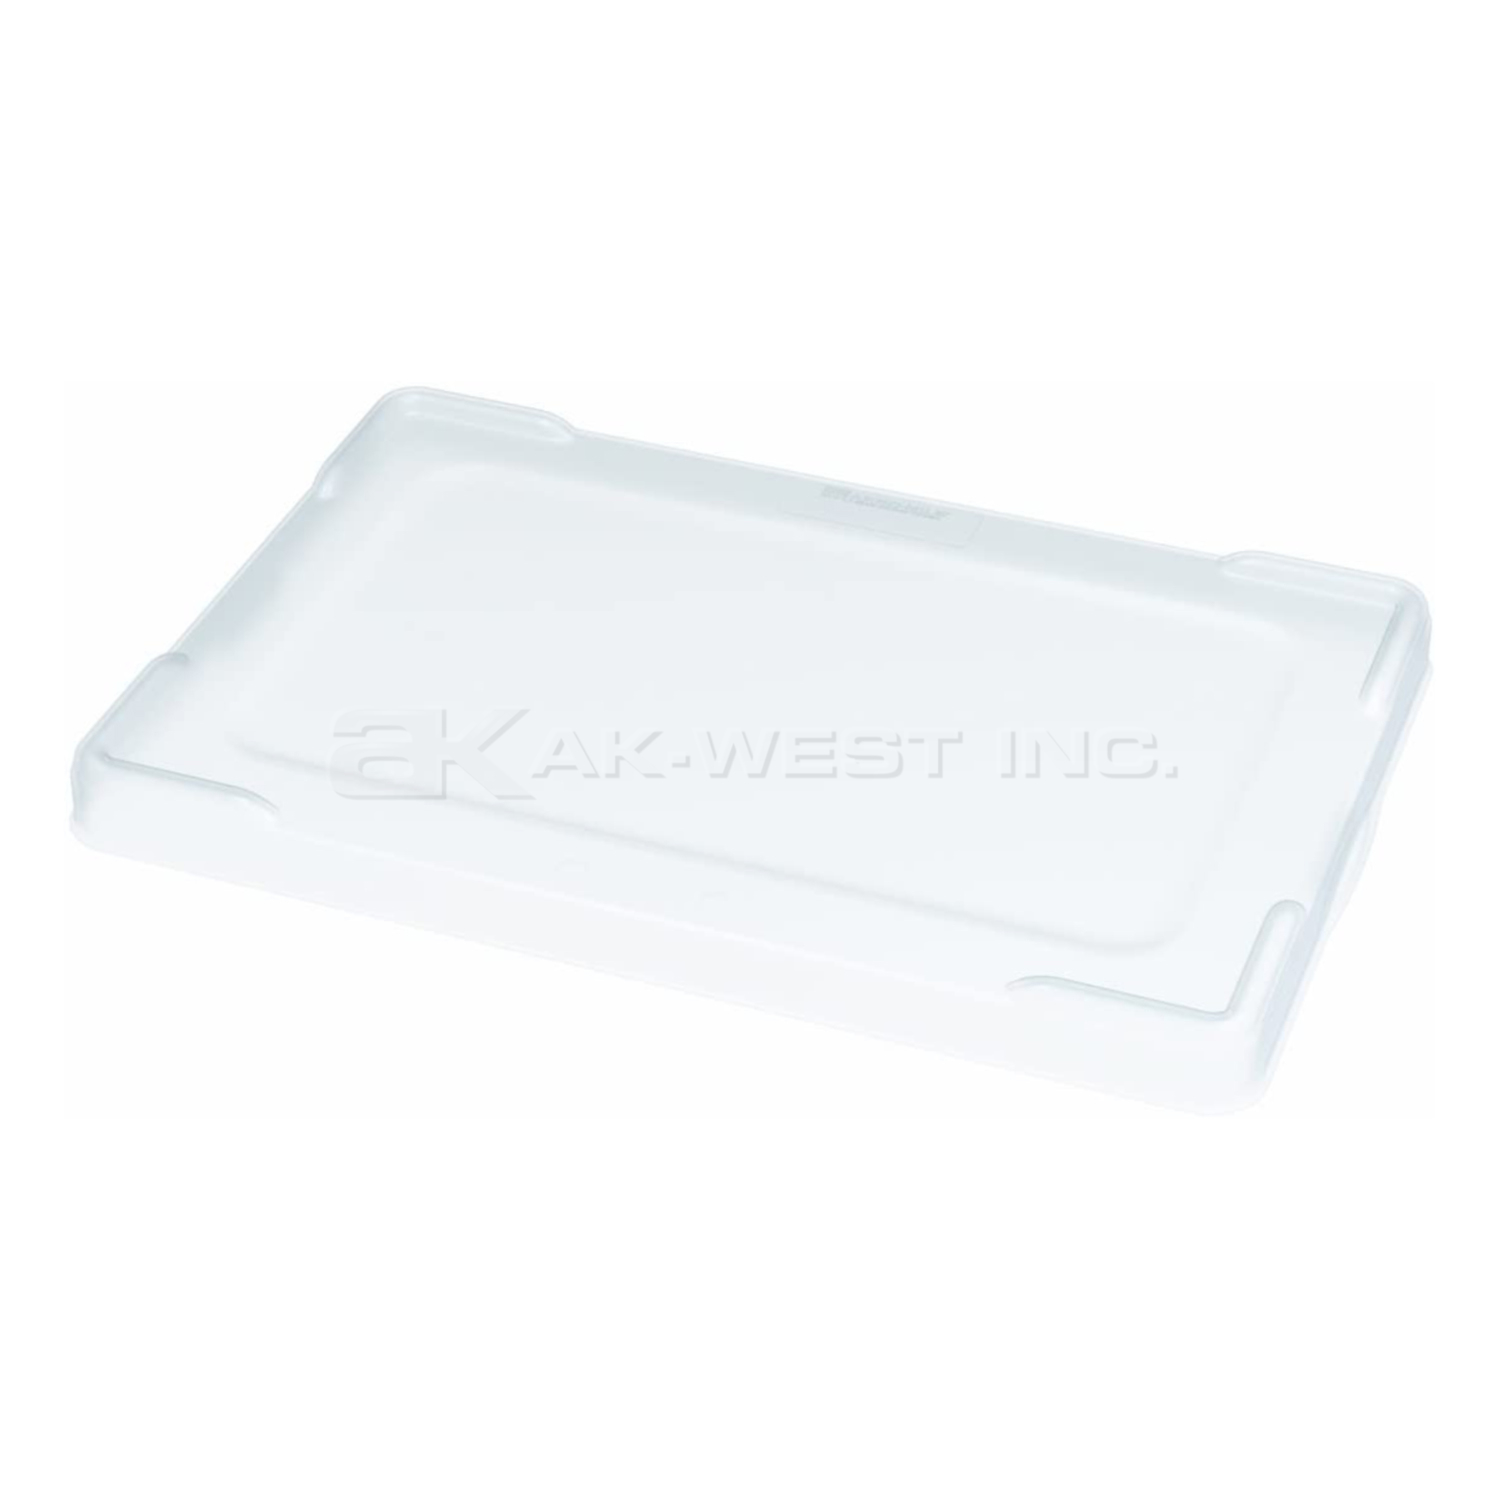 Clear, Lid For 33162, 33164, 33165, 33166, 33168 (4 Per Carton)